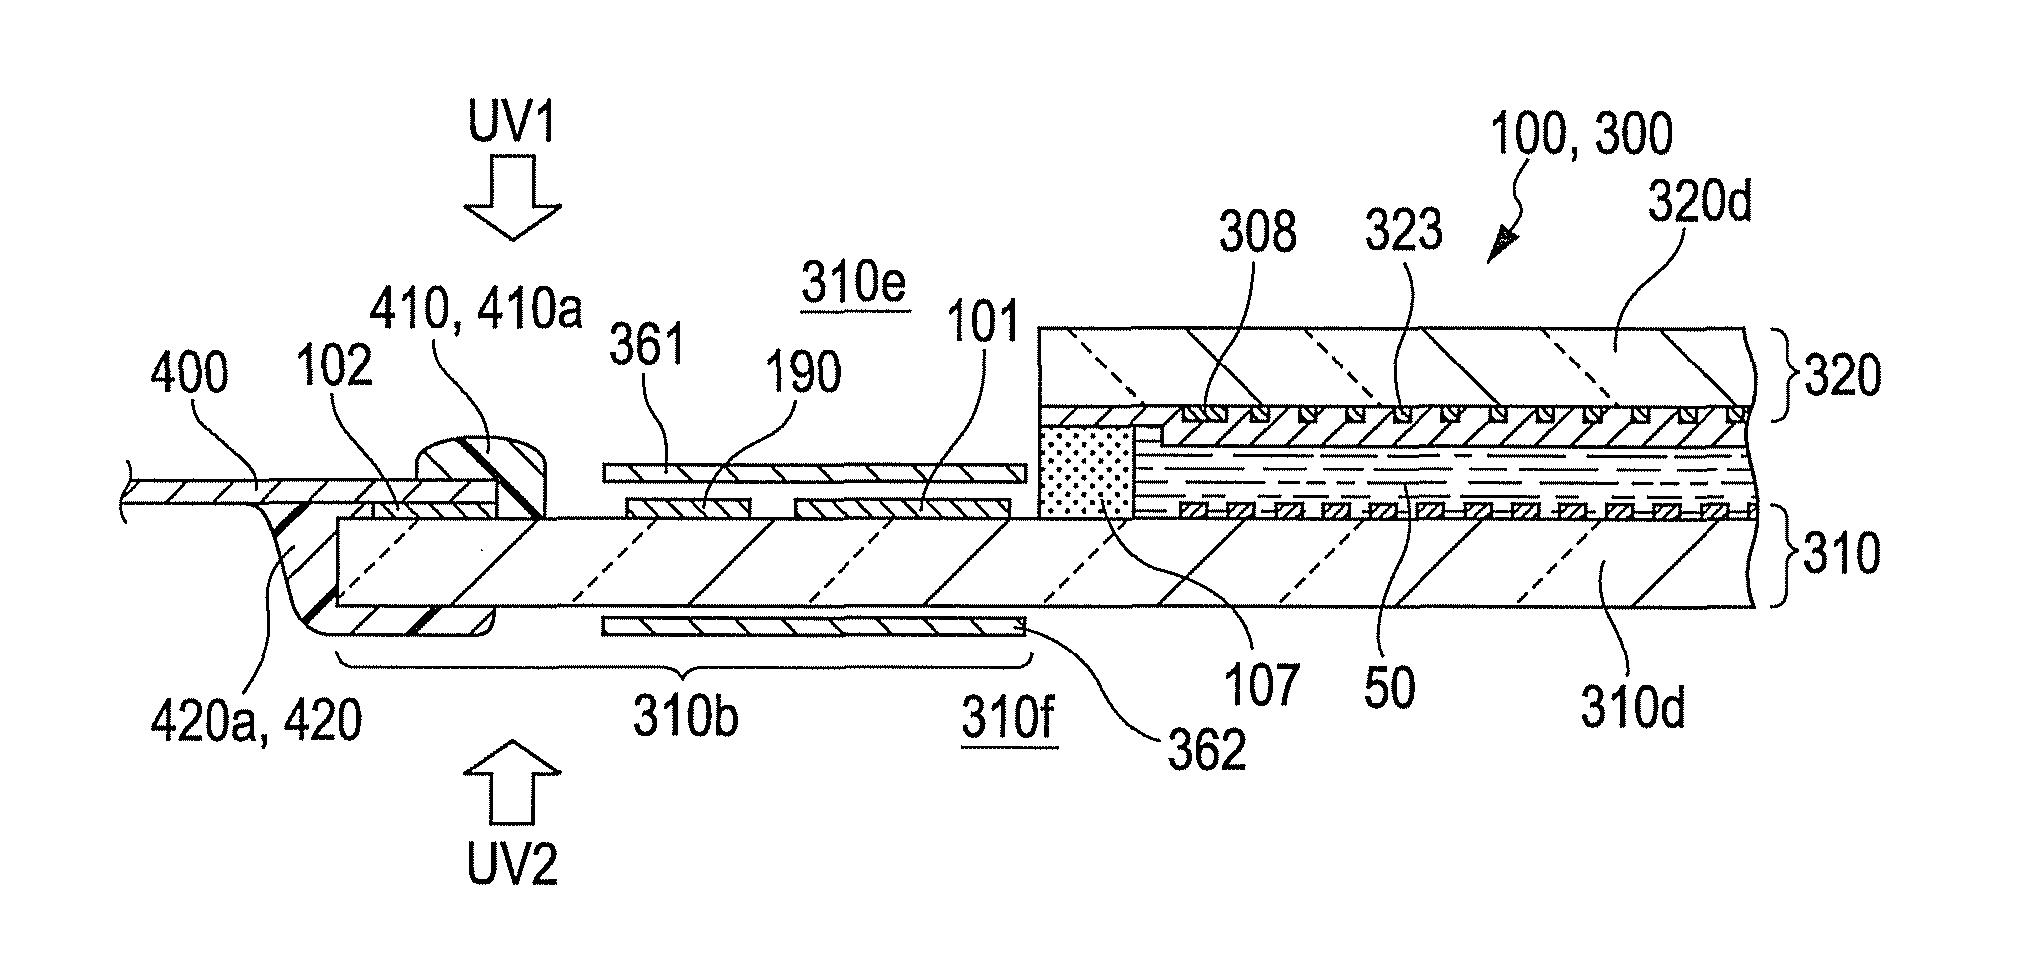 Method for manufacturing electro-optical device wherein an electrostatic protection circuit is shielded by a light-shielding sheet that is separate and apart from the electro-optical device